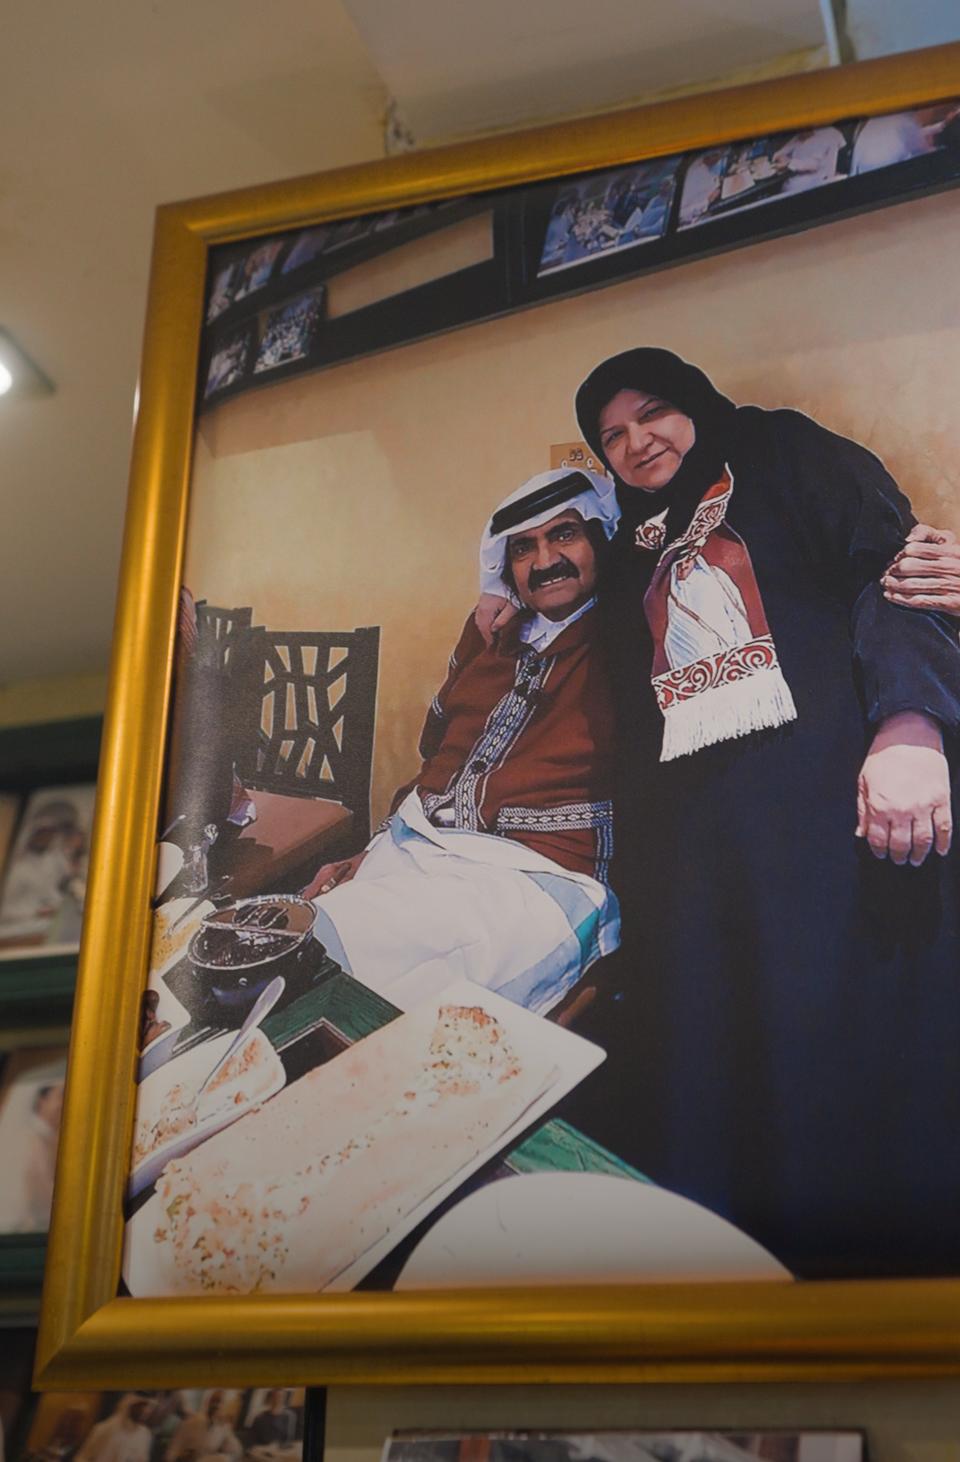 Shams al Qassabi with former ruling Emir of Qatar, Hamad bin Khalifa Al Thani. Shams is famous for promoting authentic Qatari culture and cuisine and serves as a symbol of financial independence for women in the Gulf nation.